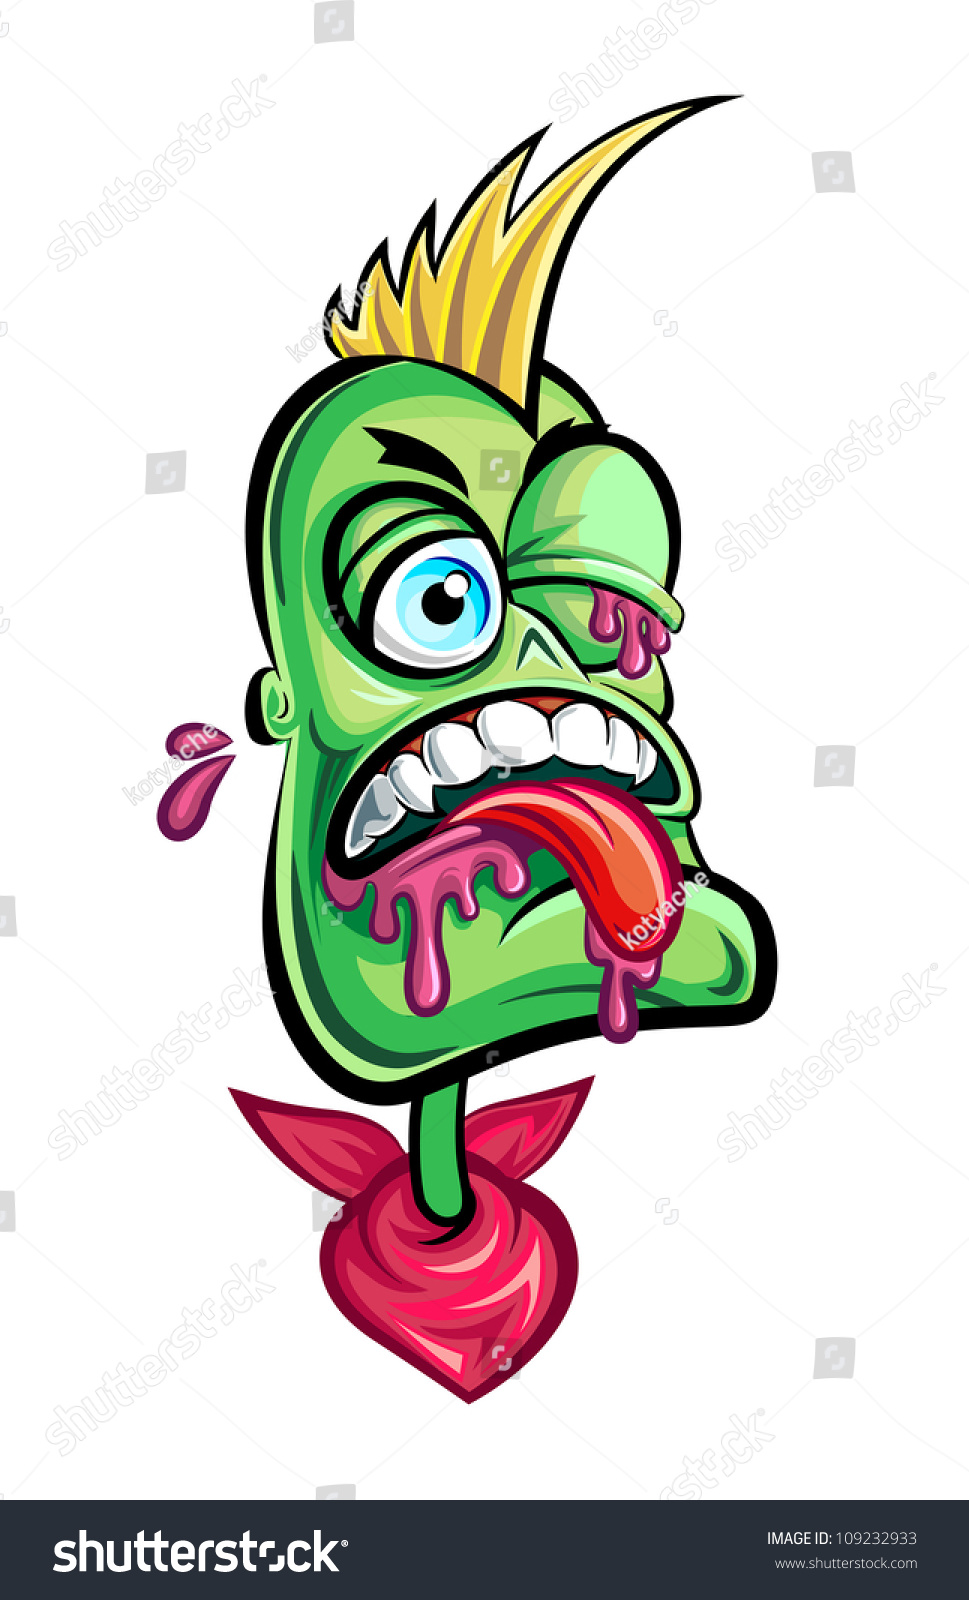 ugly clipart images - photo #26